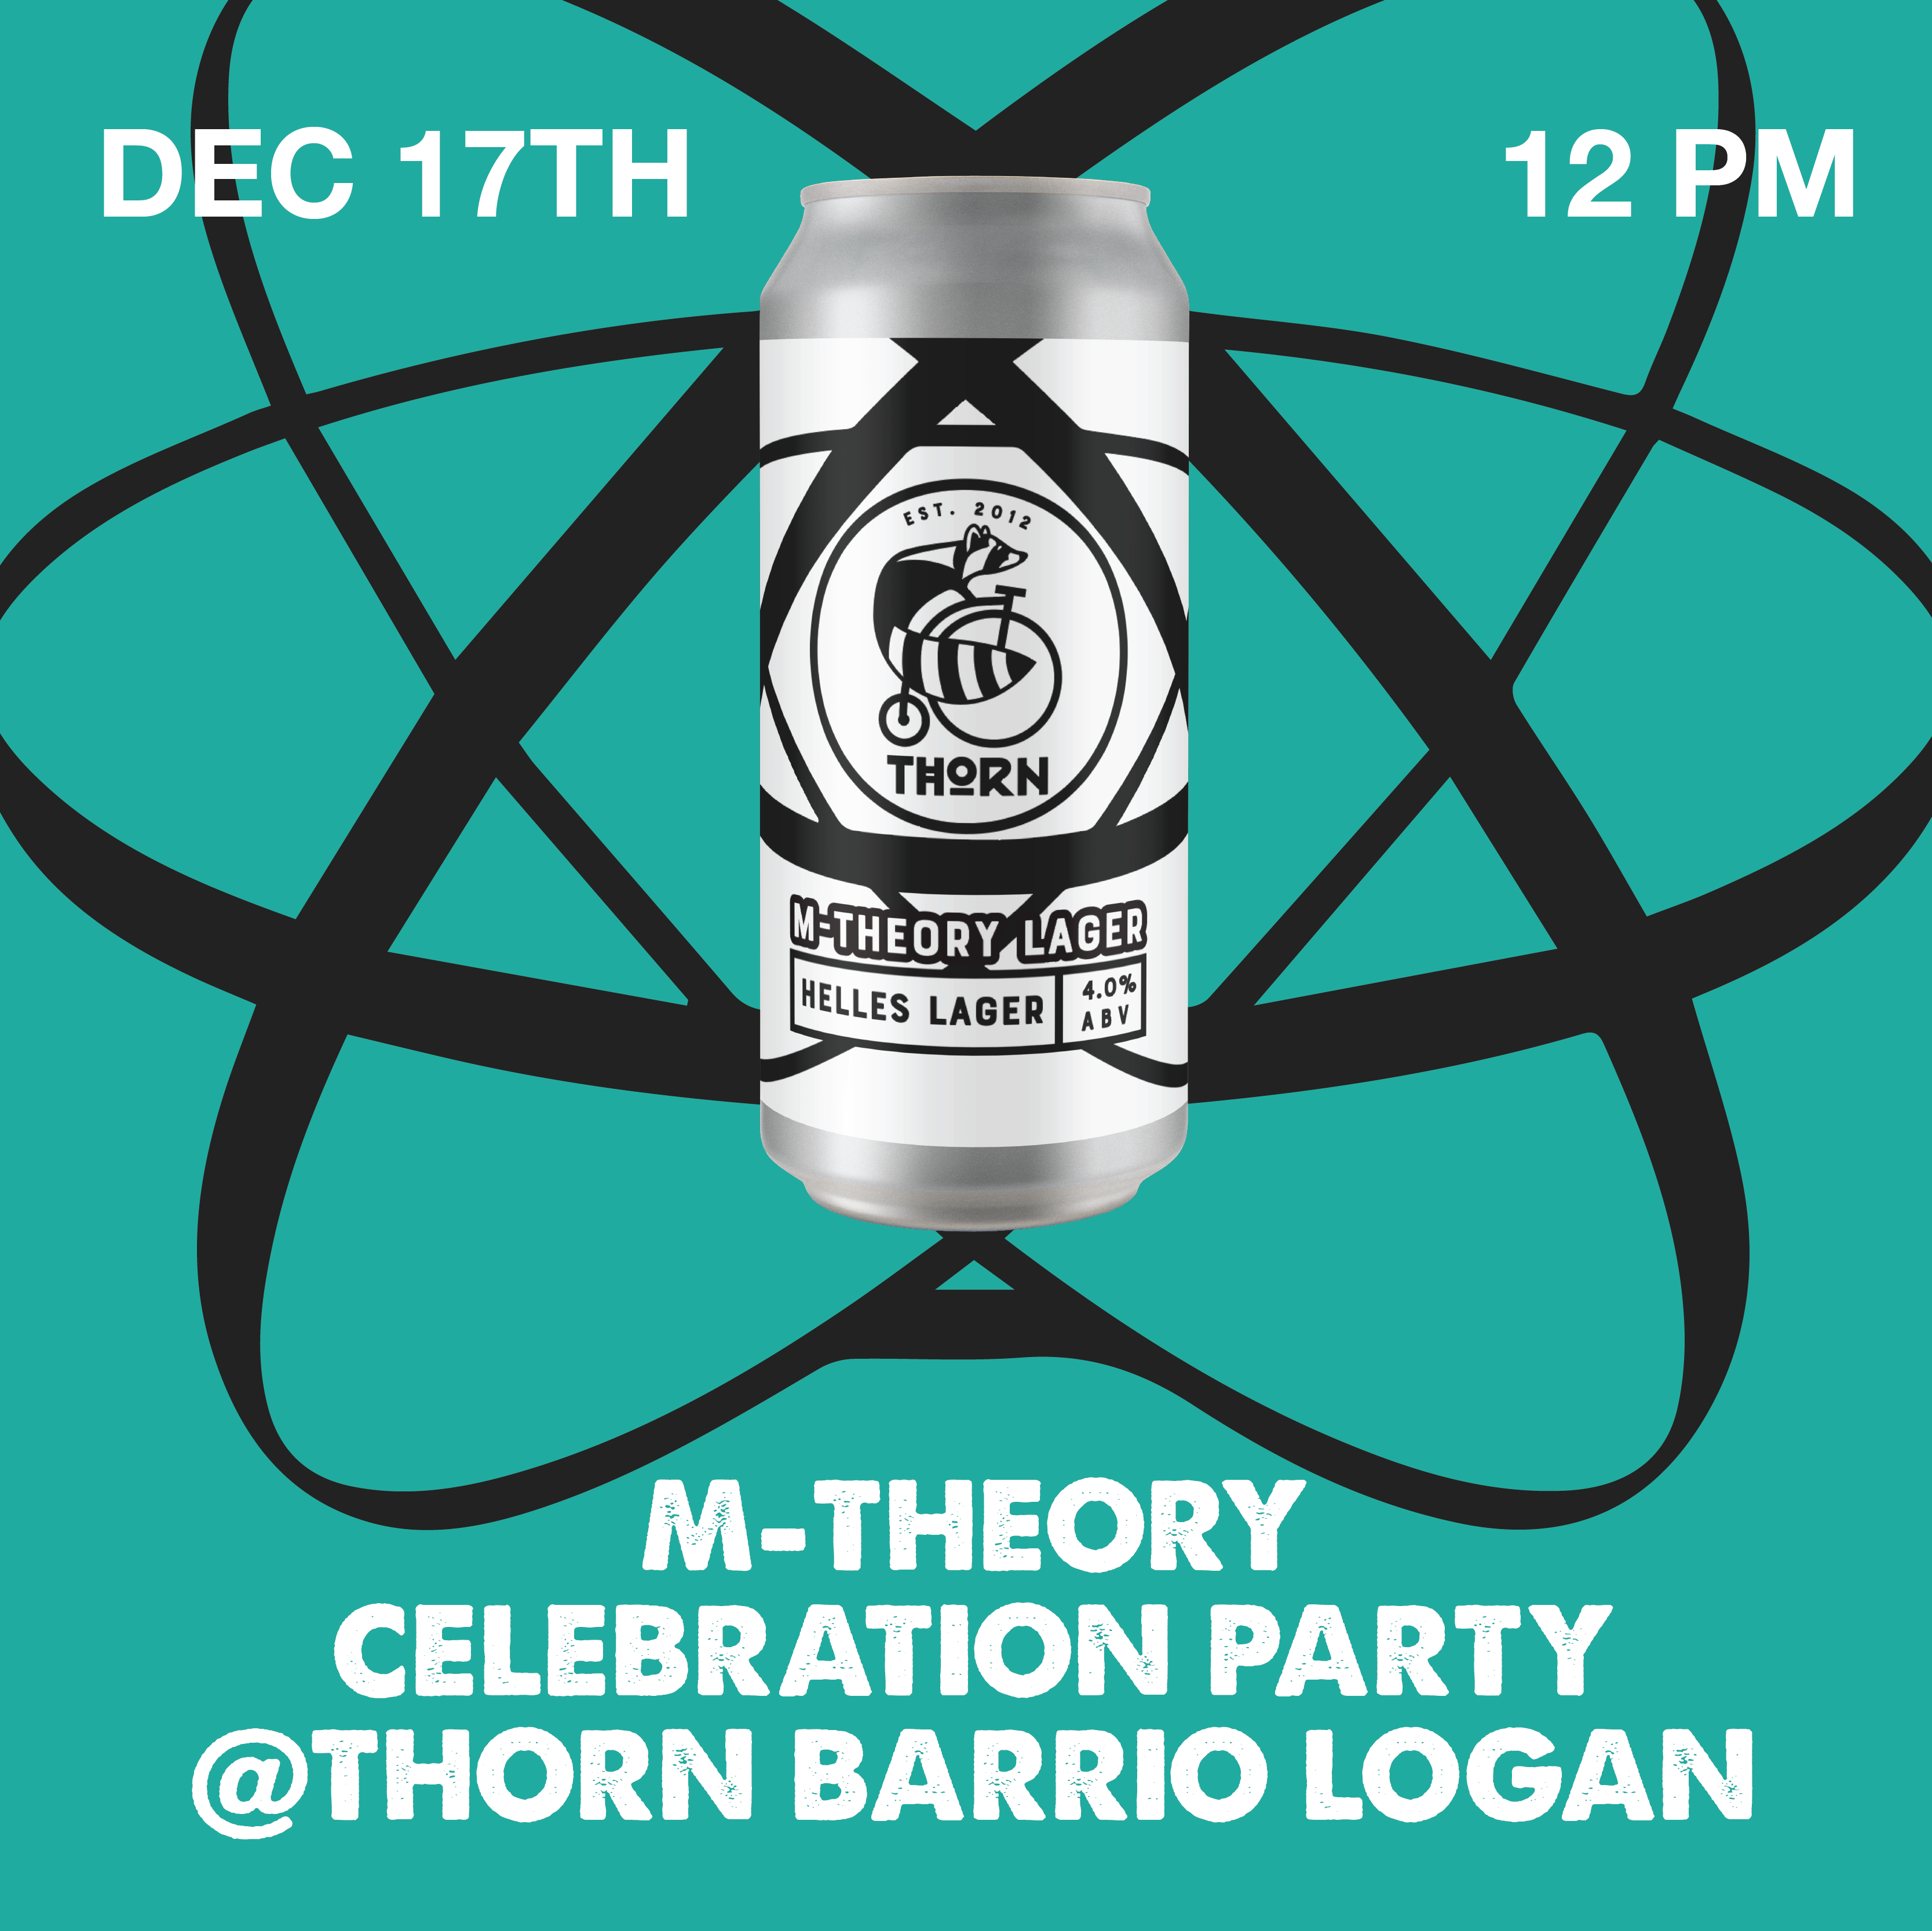 A can of Thorn's M-Theory lager in the center with black and turqoise details